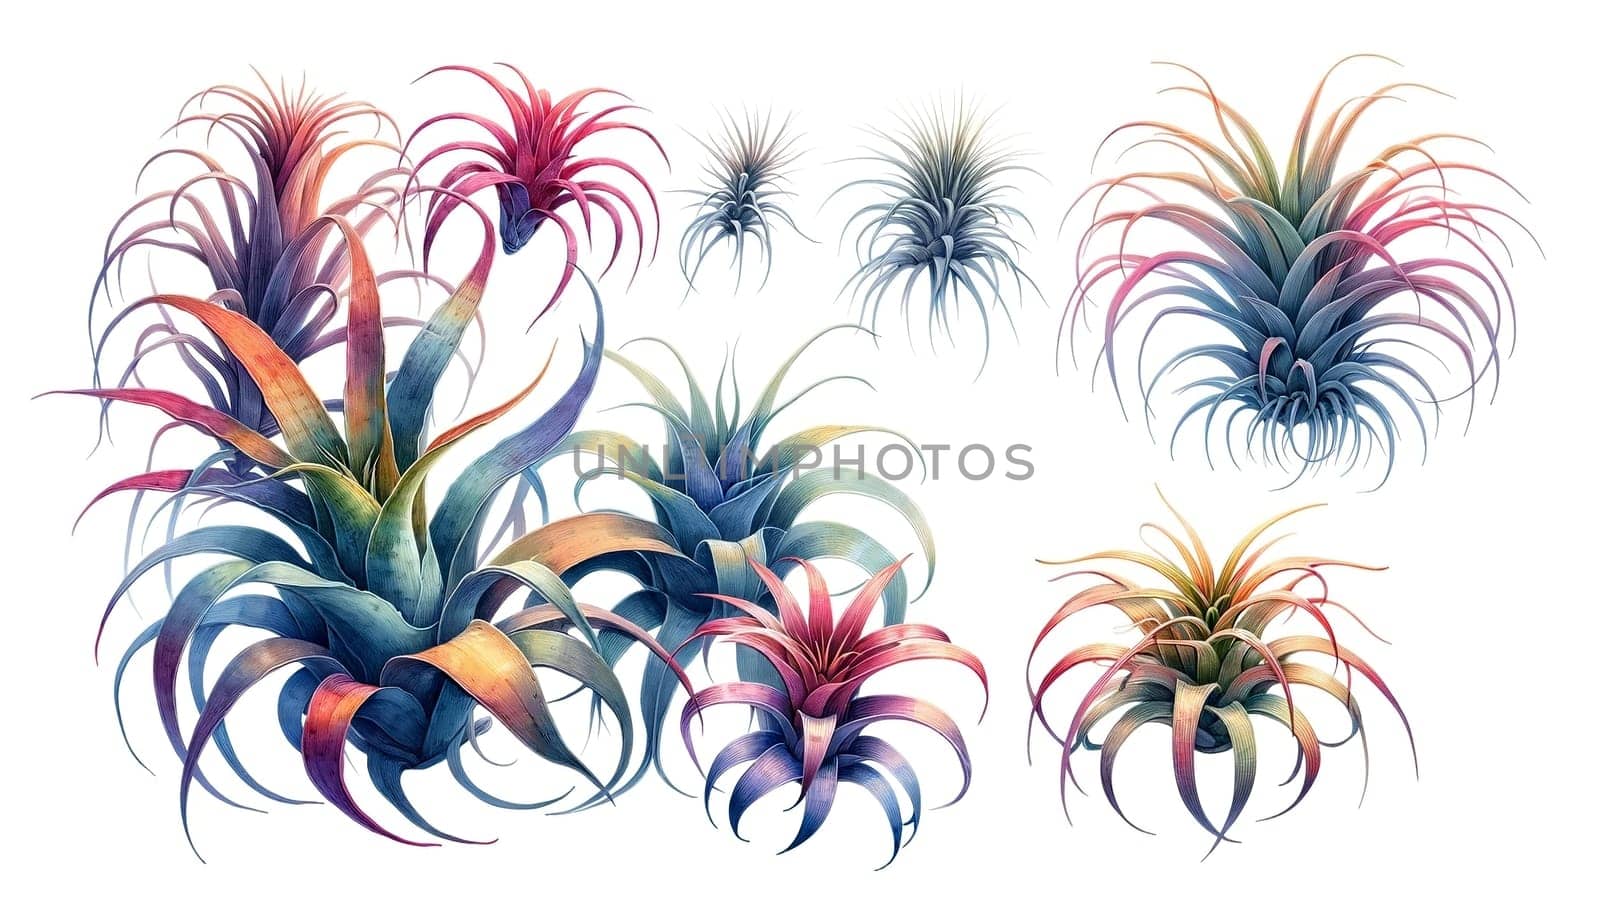 Isolated illustrations of Air Plants against White Background by SweCreatives